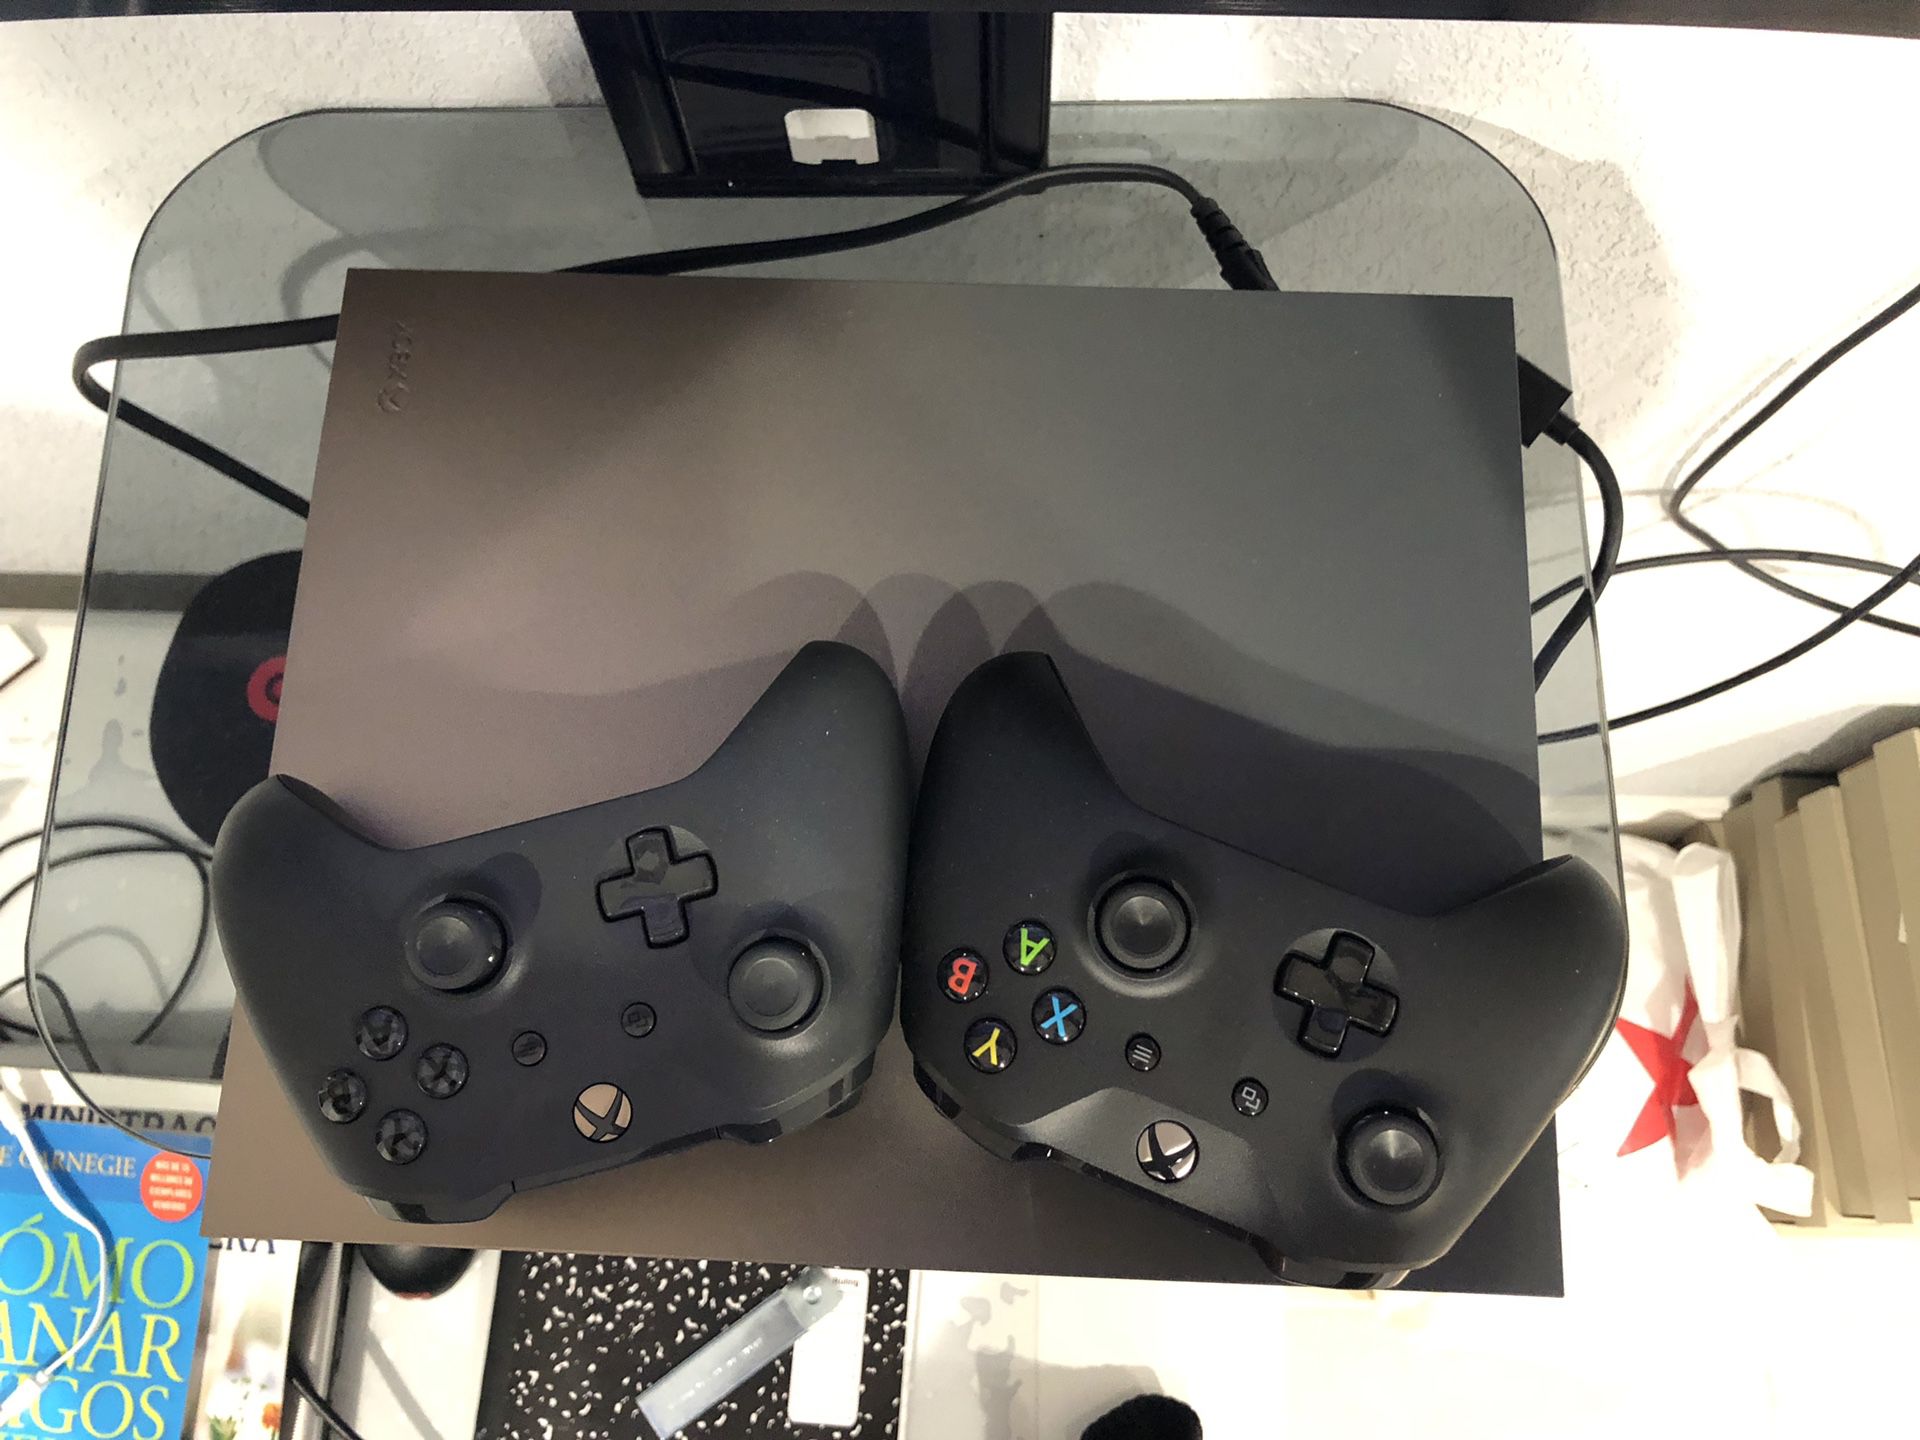 Xbox One X + 2 controllers + Battlefield Free